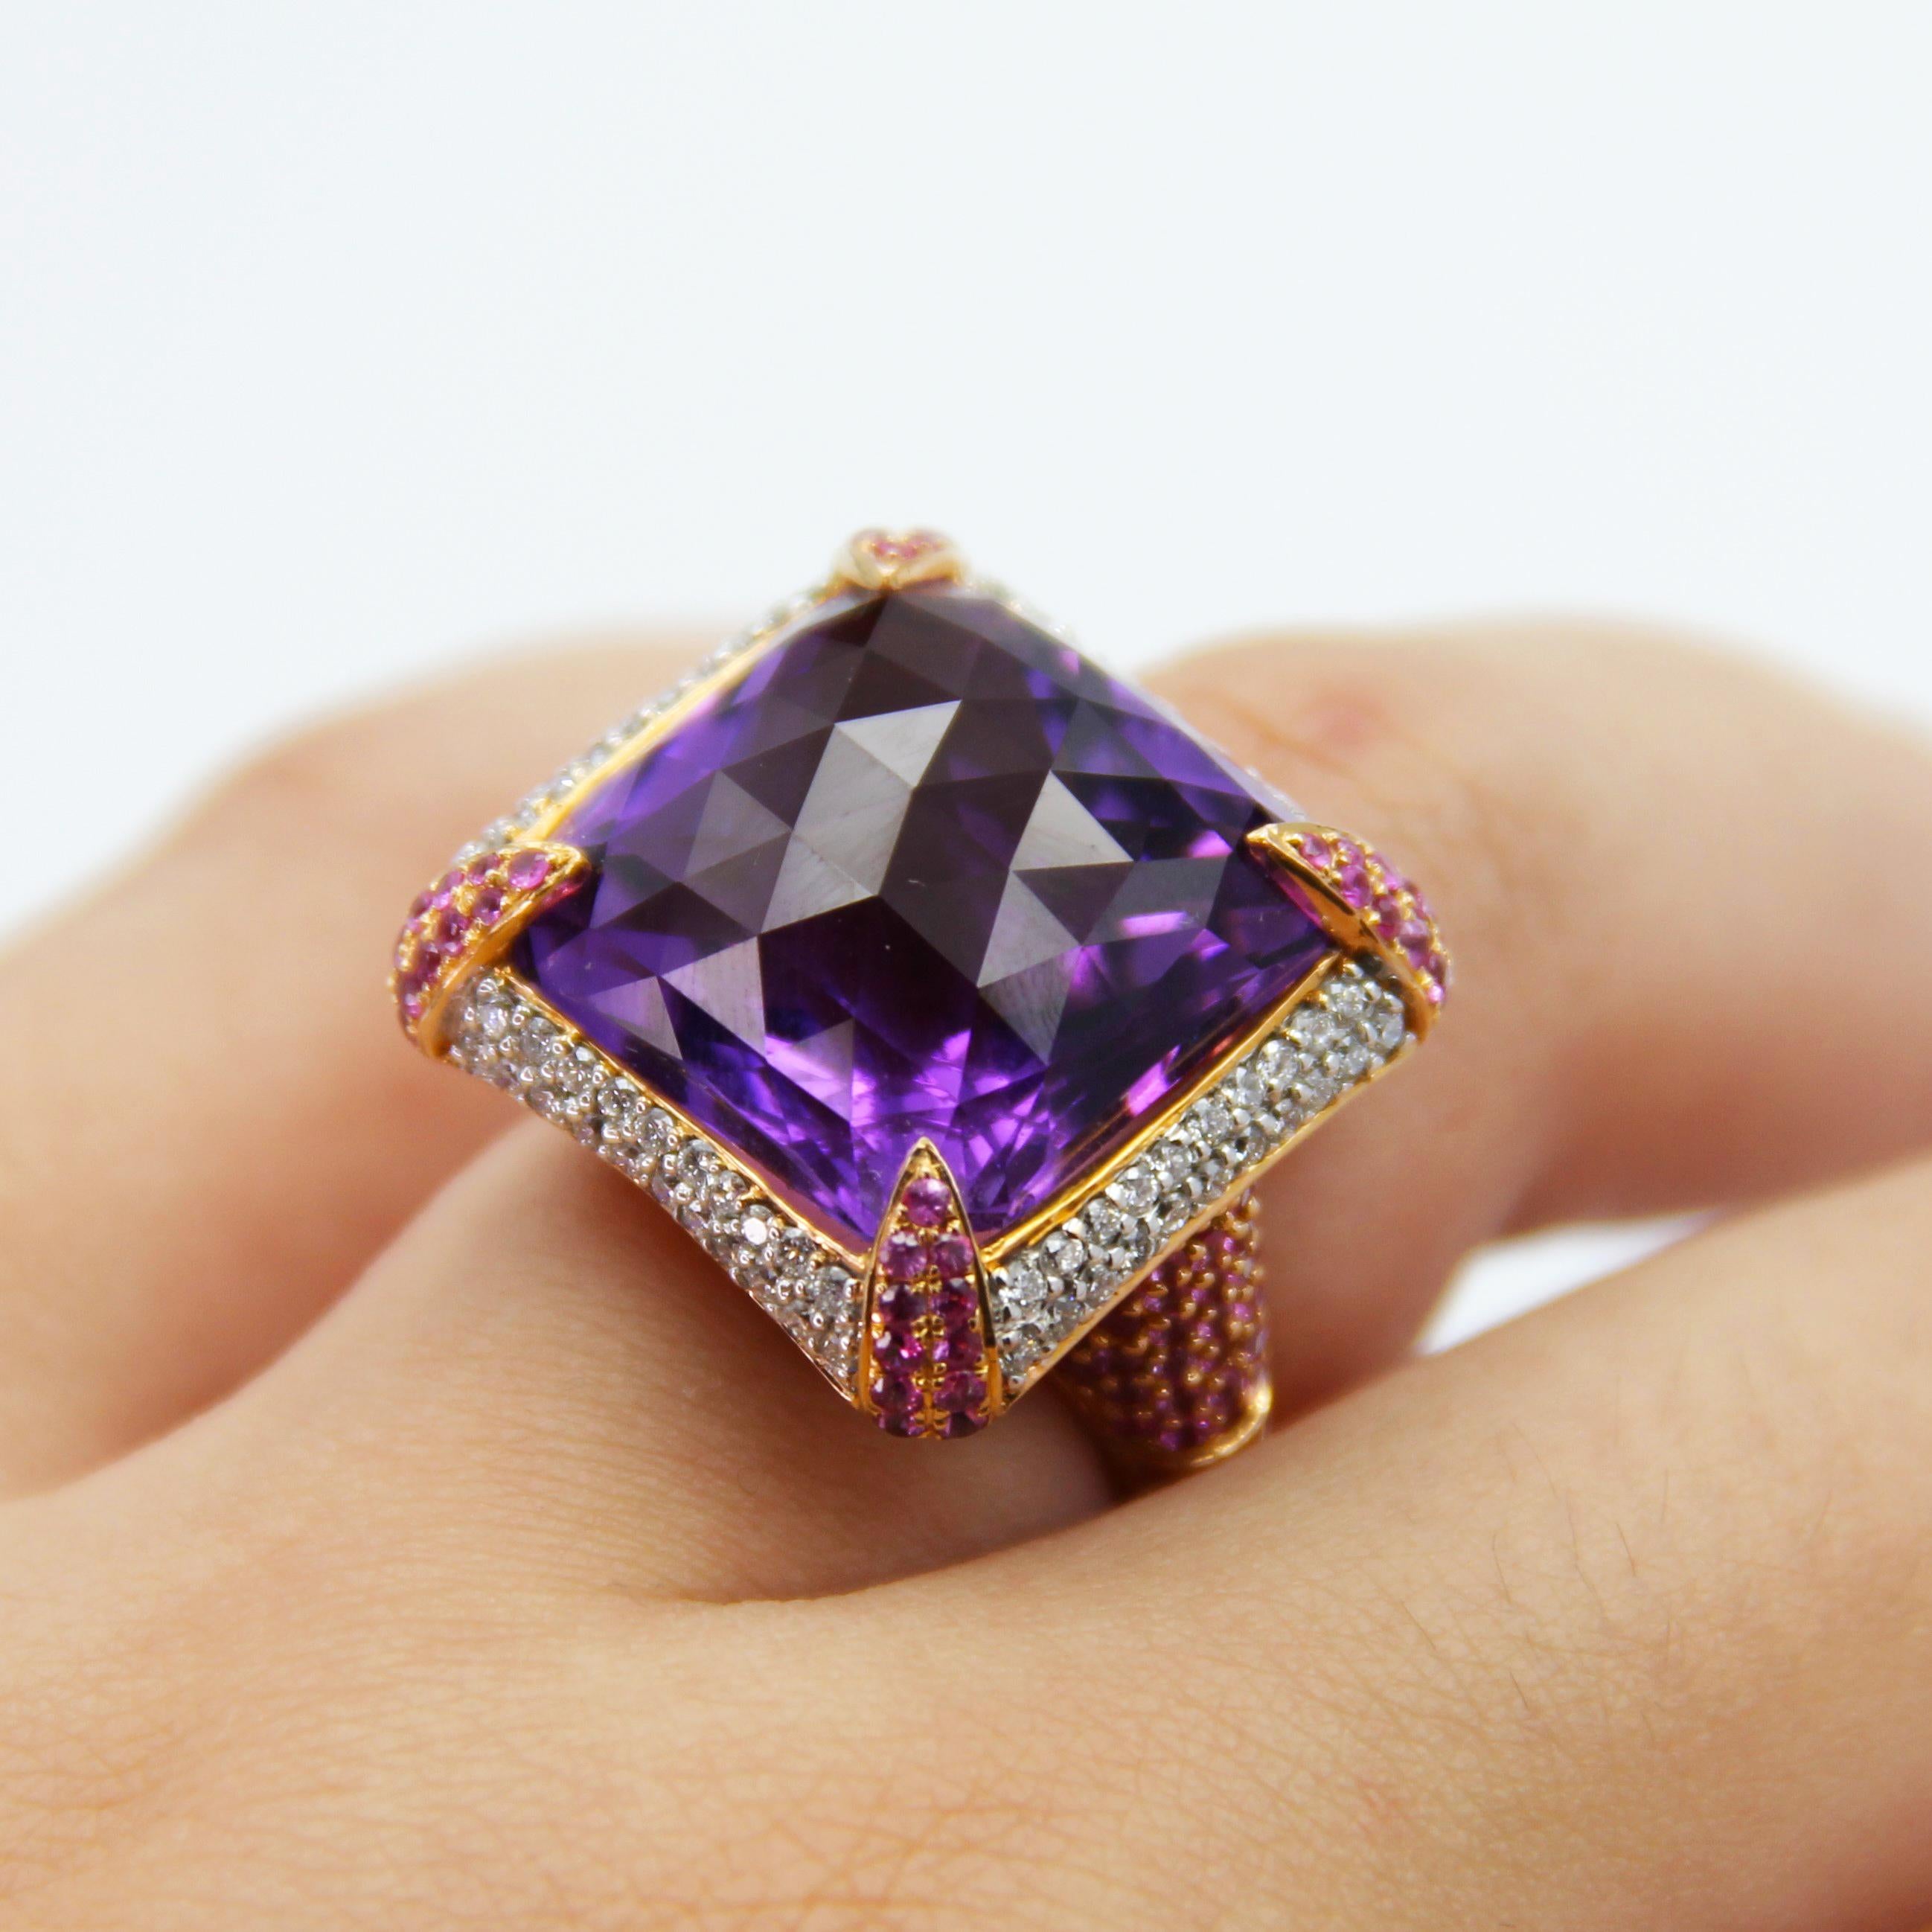 IGSL Certified Amethyst Pink Sapphire Diamond Cocktail Ring For Sale 4